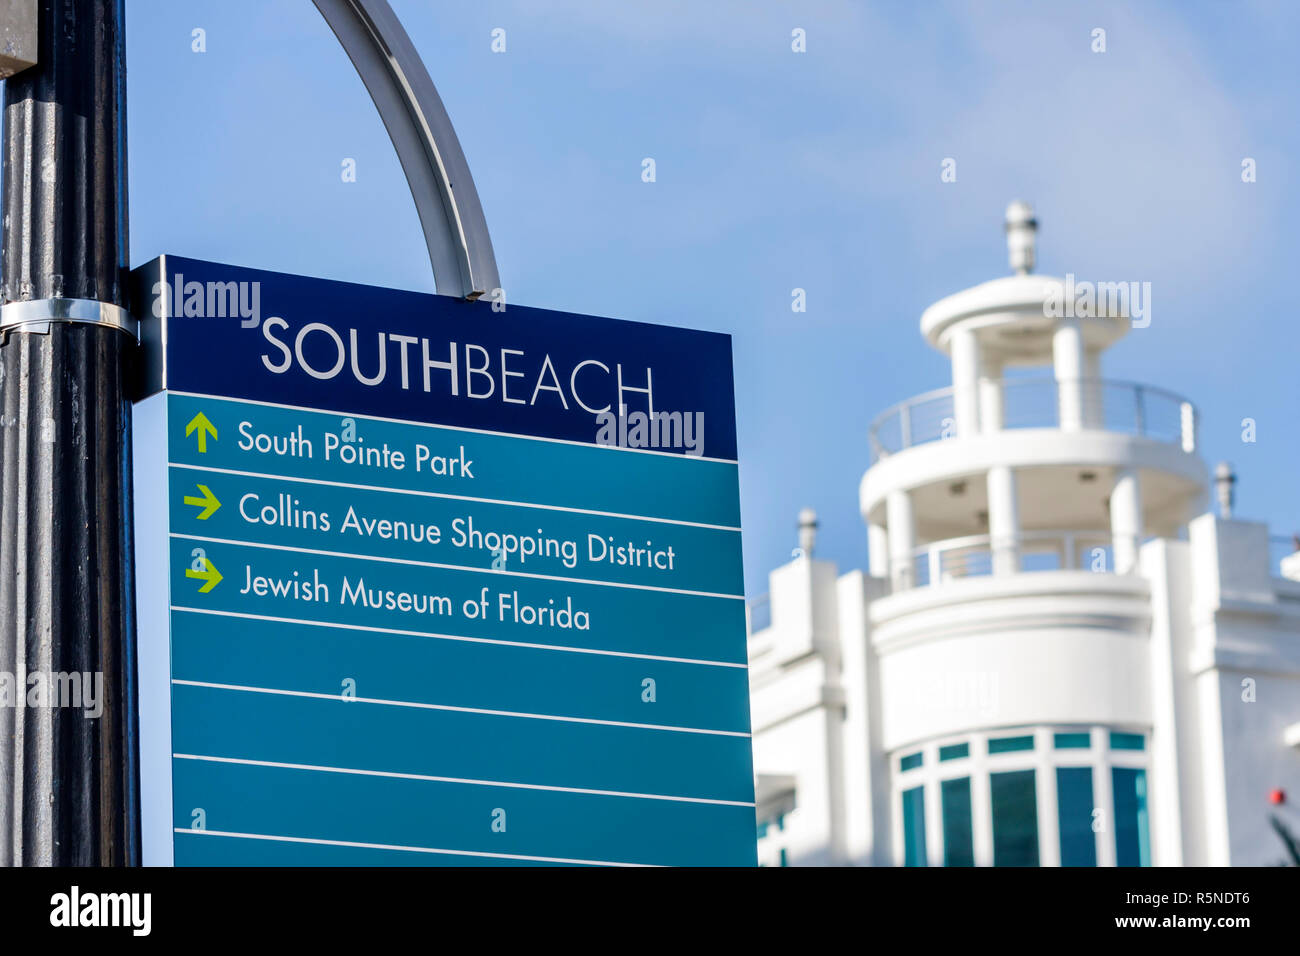 Miami Beach Florida,Ocean Drive,sign,sign,directions,location,public information,branding,image,South Pointe Park,Point,Collins Avenue,shopping shoppe Stock Photo